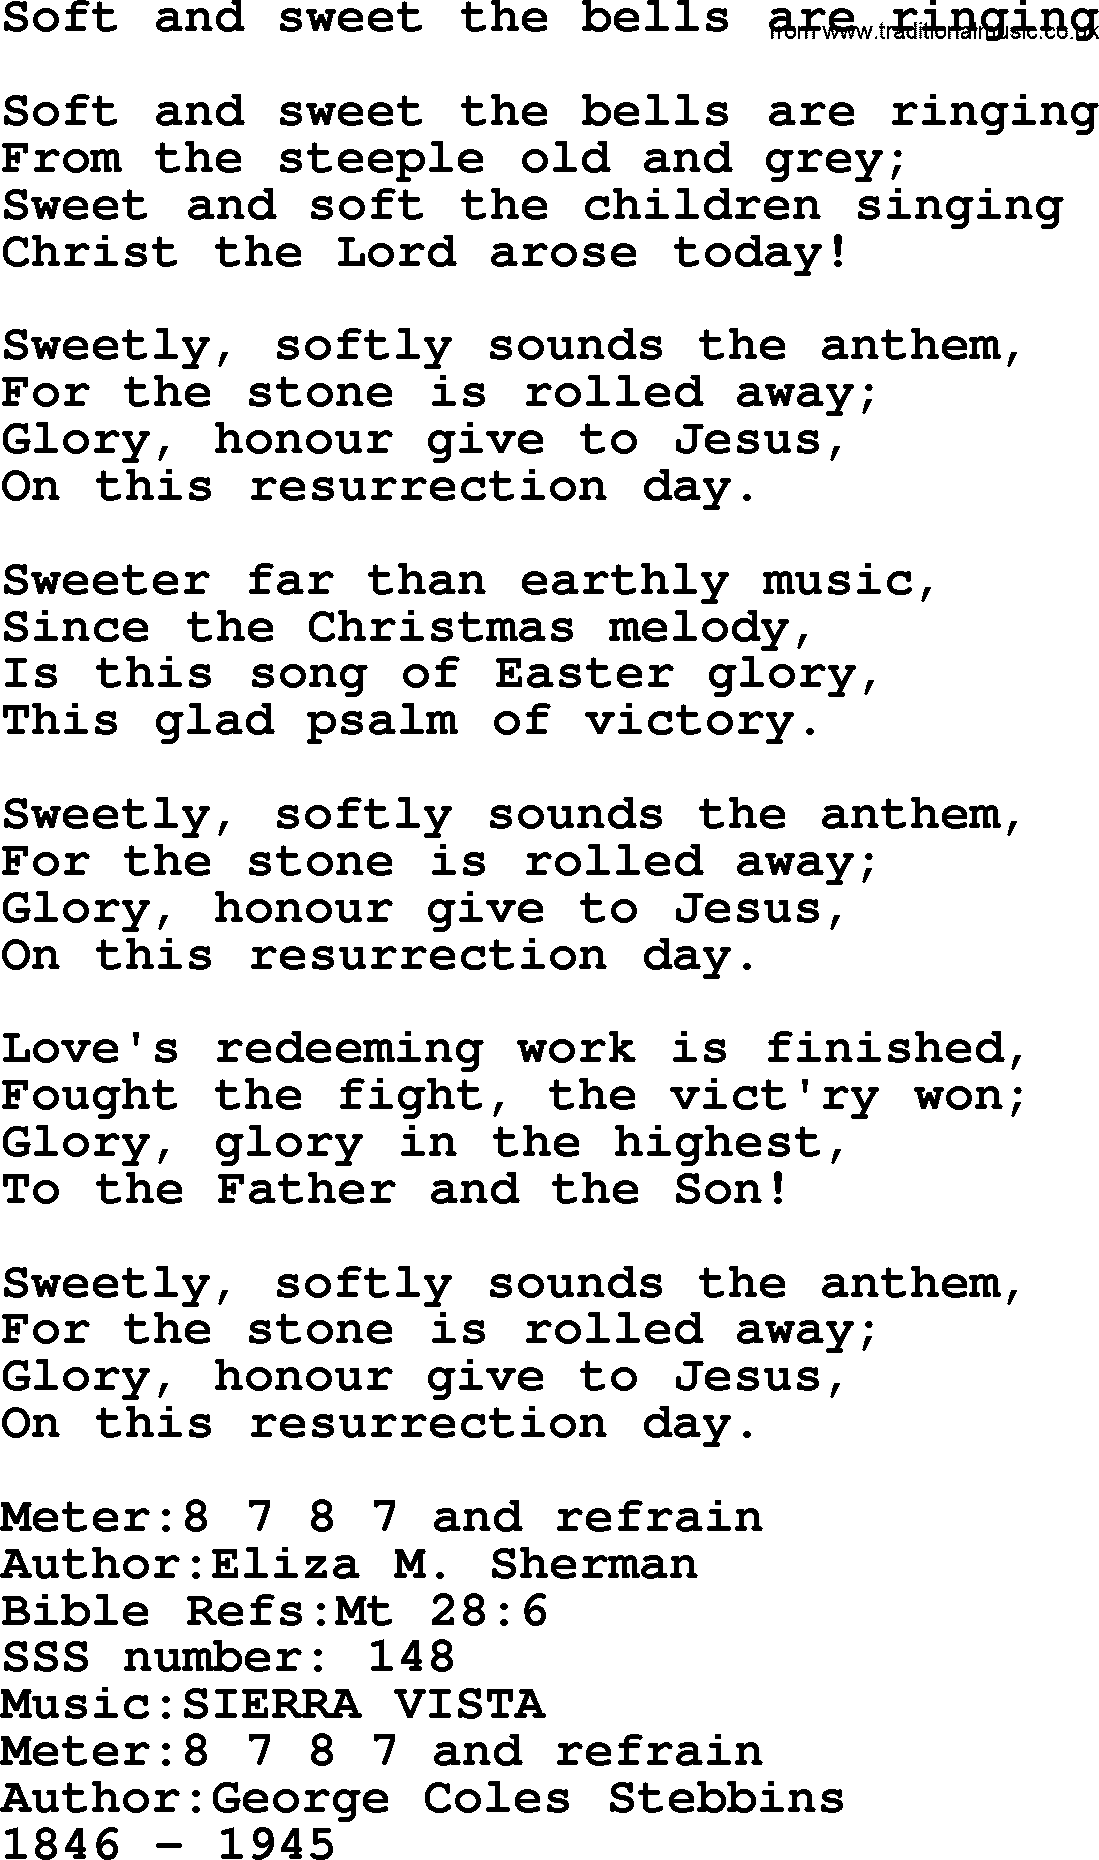 Sacred Songs and Solos complete, 1200 Hymns, title: Soft And Sweet The Bells Are Ringing, lyrics and PDF